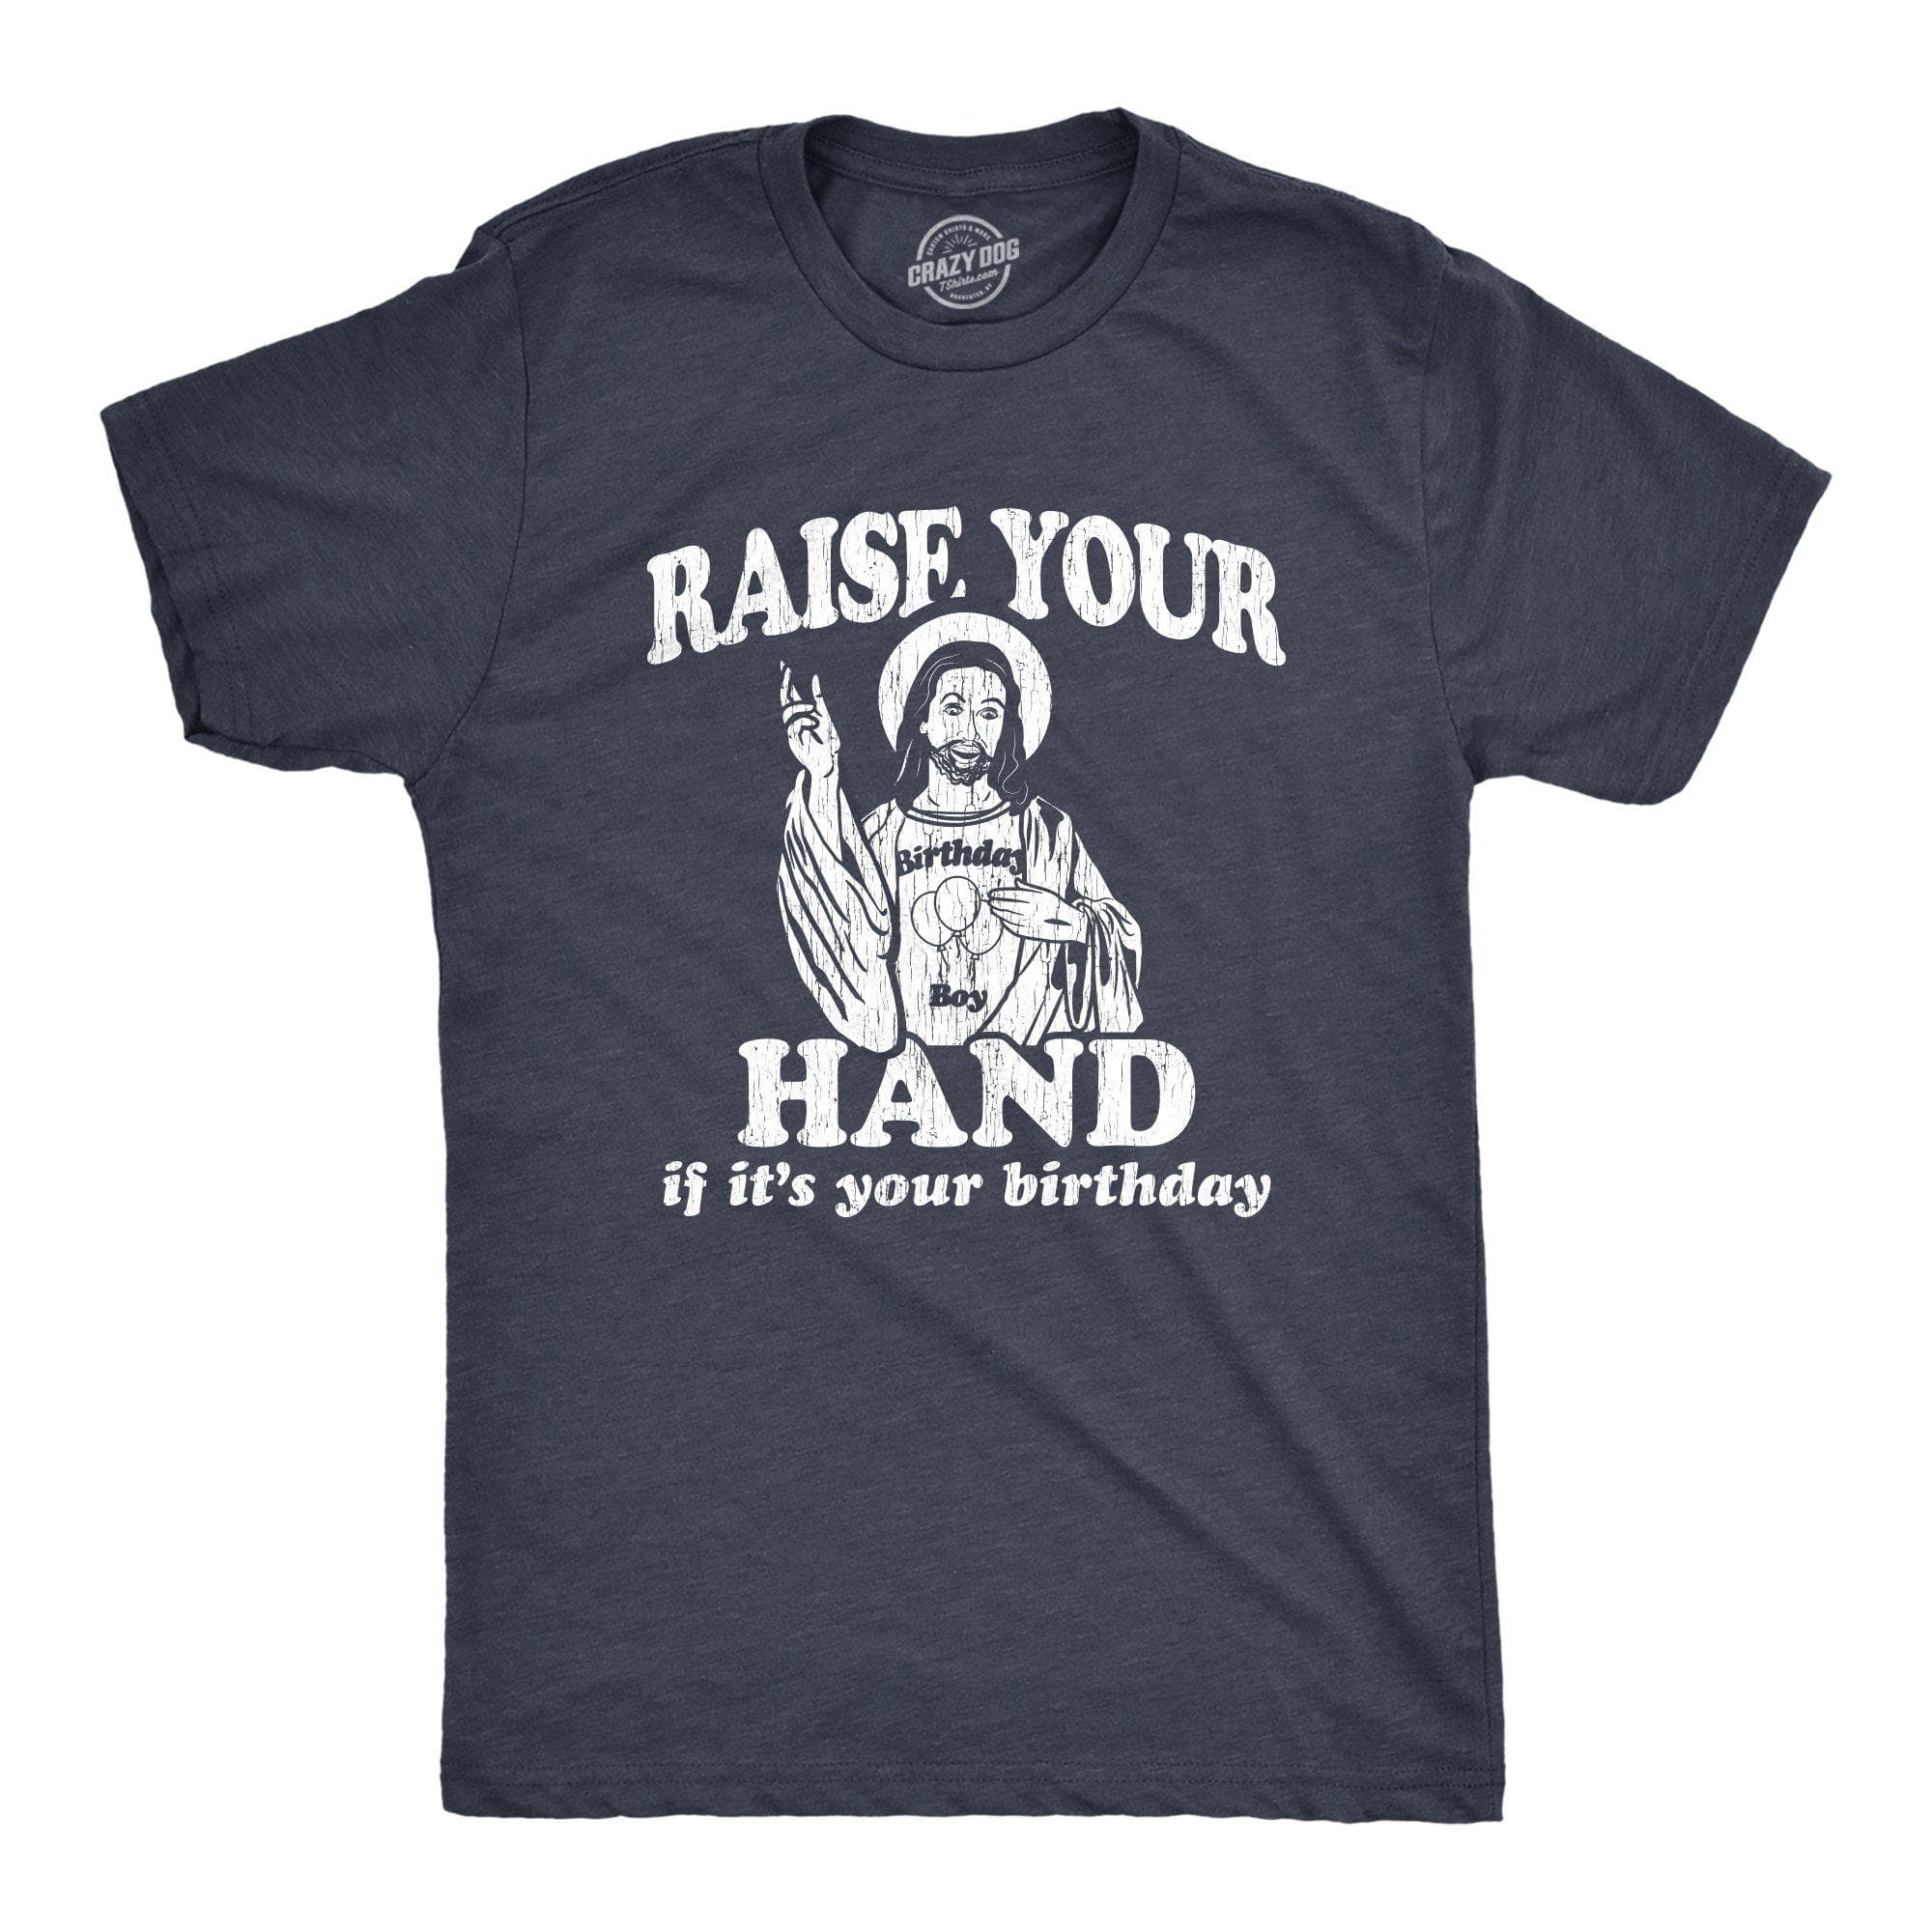 Raise Your Hand If It's Your Birthday Men's Tshirt - Crazy Dog T-Shirts